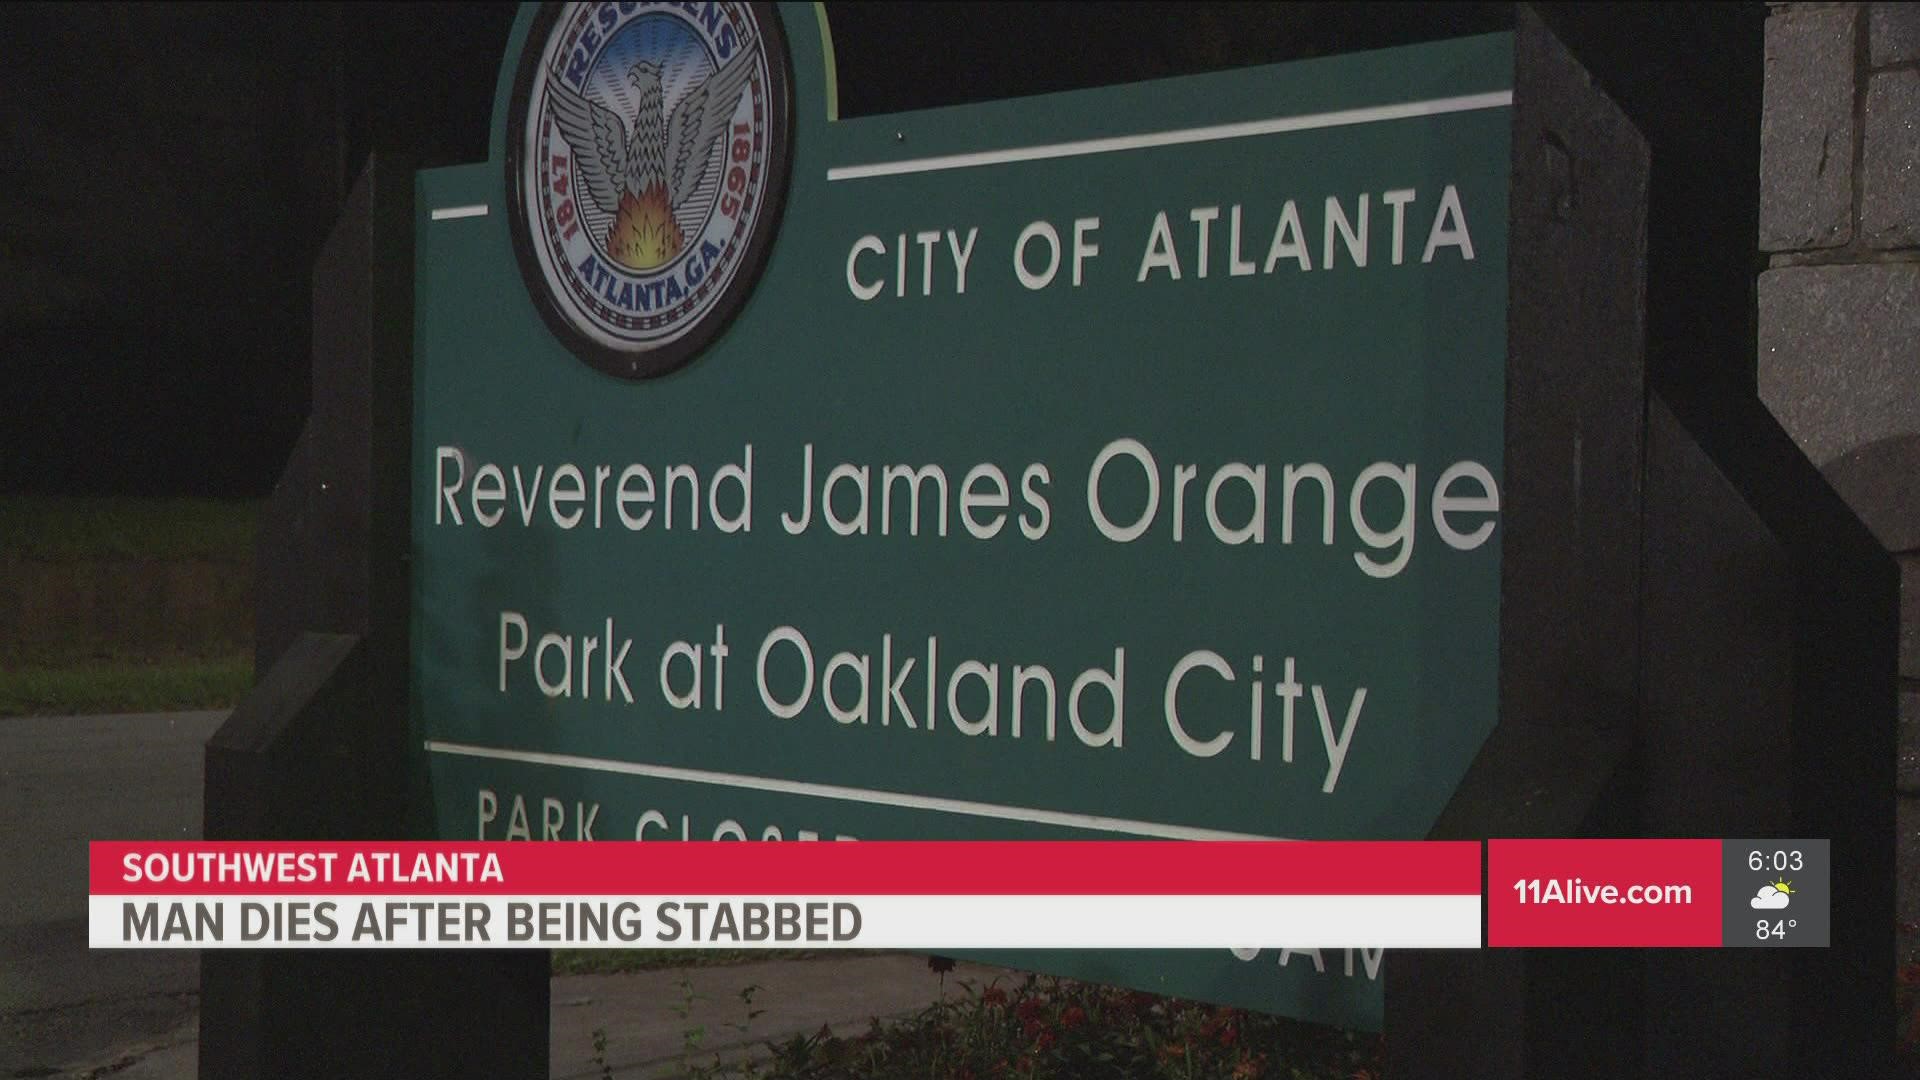 Atlanta Police responded to the stabbing around 5 p.m. at the James Orange Recreation Center at 1305 Oakland Drive.